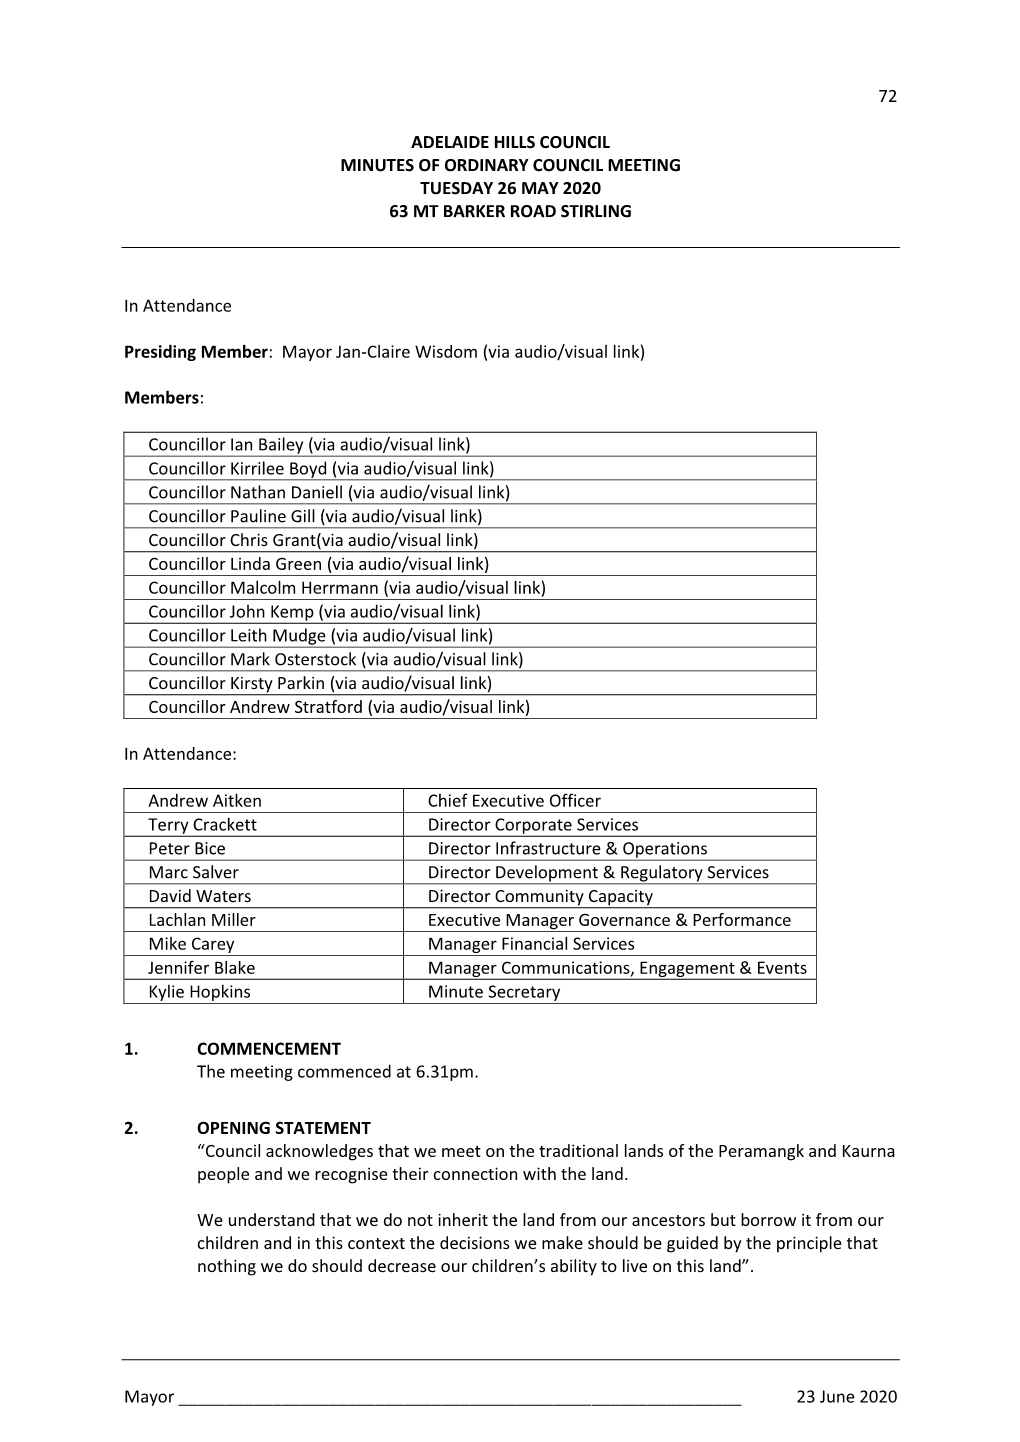 Council Minutes of Ordinary Council Meeting Tuesday 26 May 2020 63 Mt Barker Road Stirling